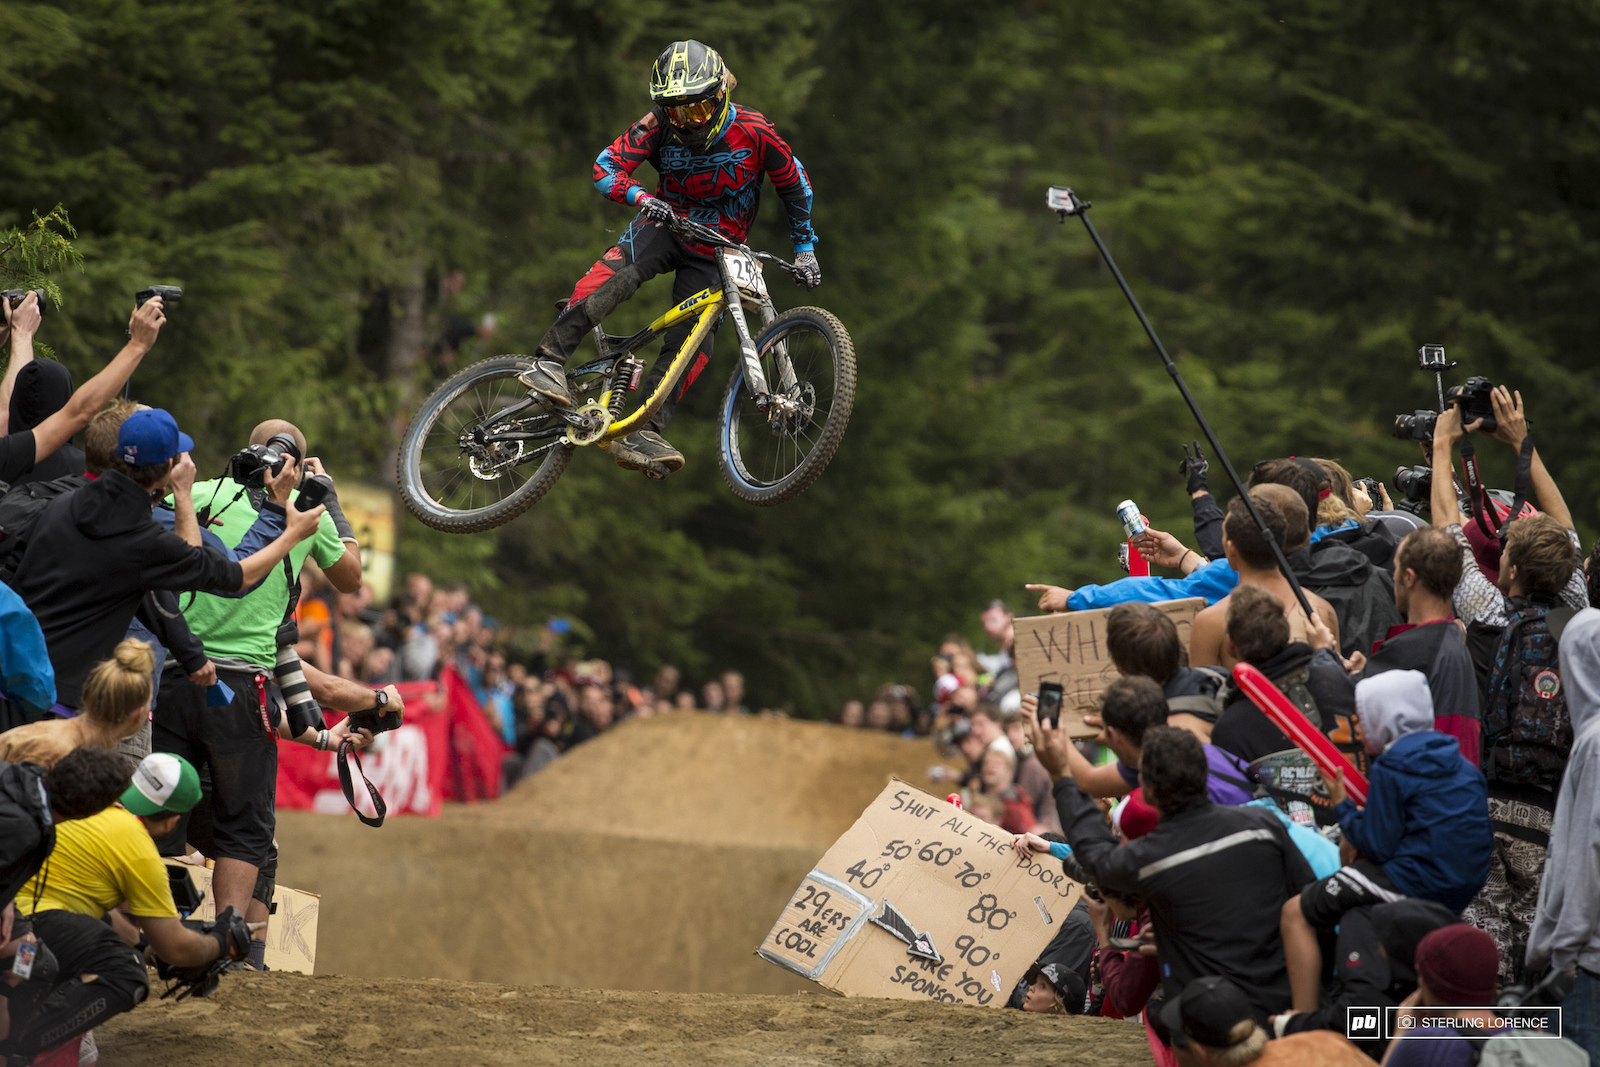 Casey brown at whip off championships, crankworx 2013